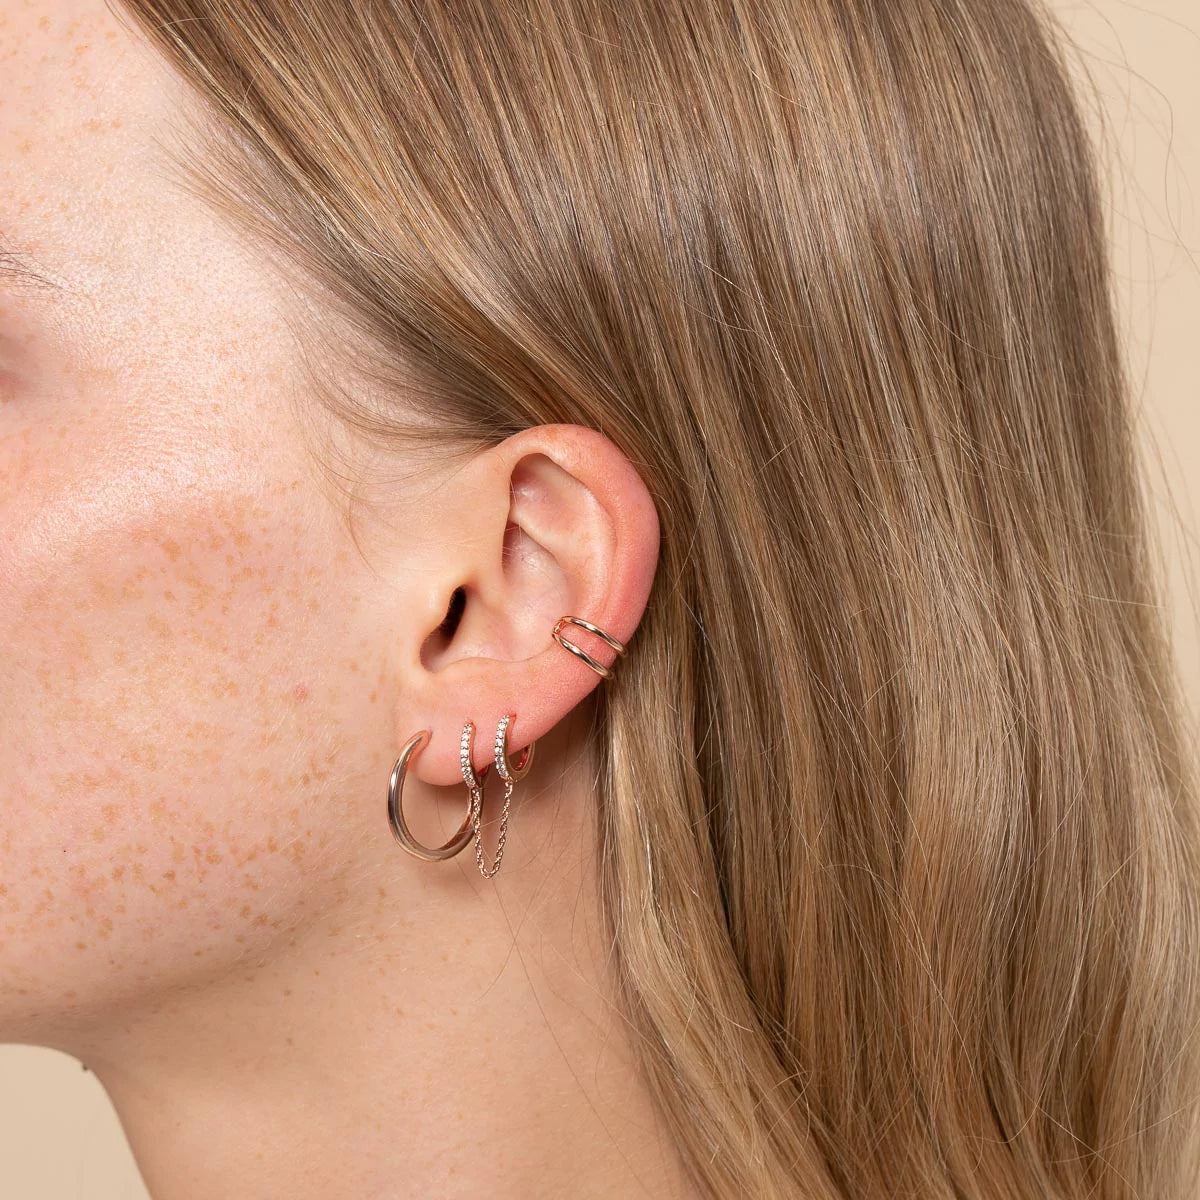 Illusion Essential Ear Cuff in Rose Gold worn with other earrings